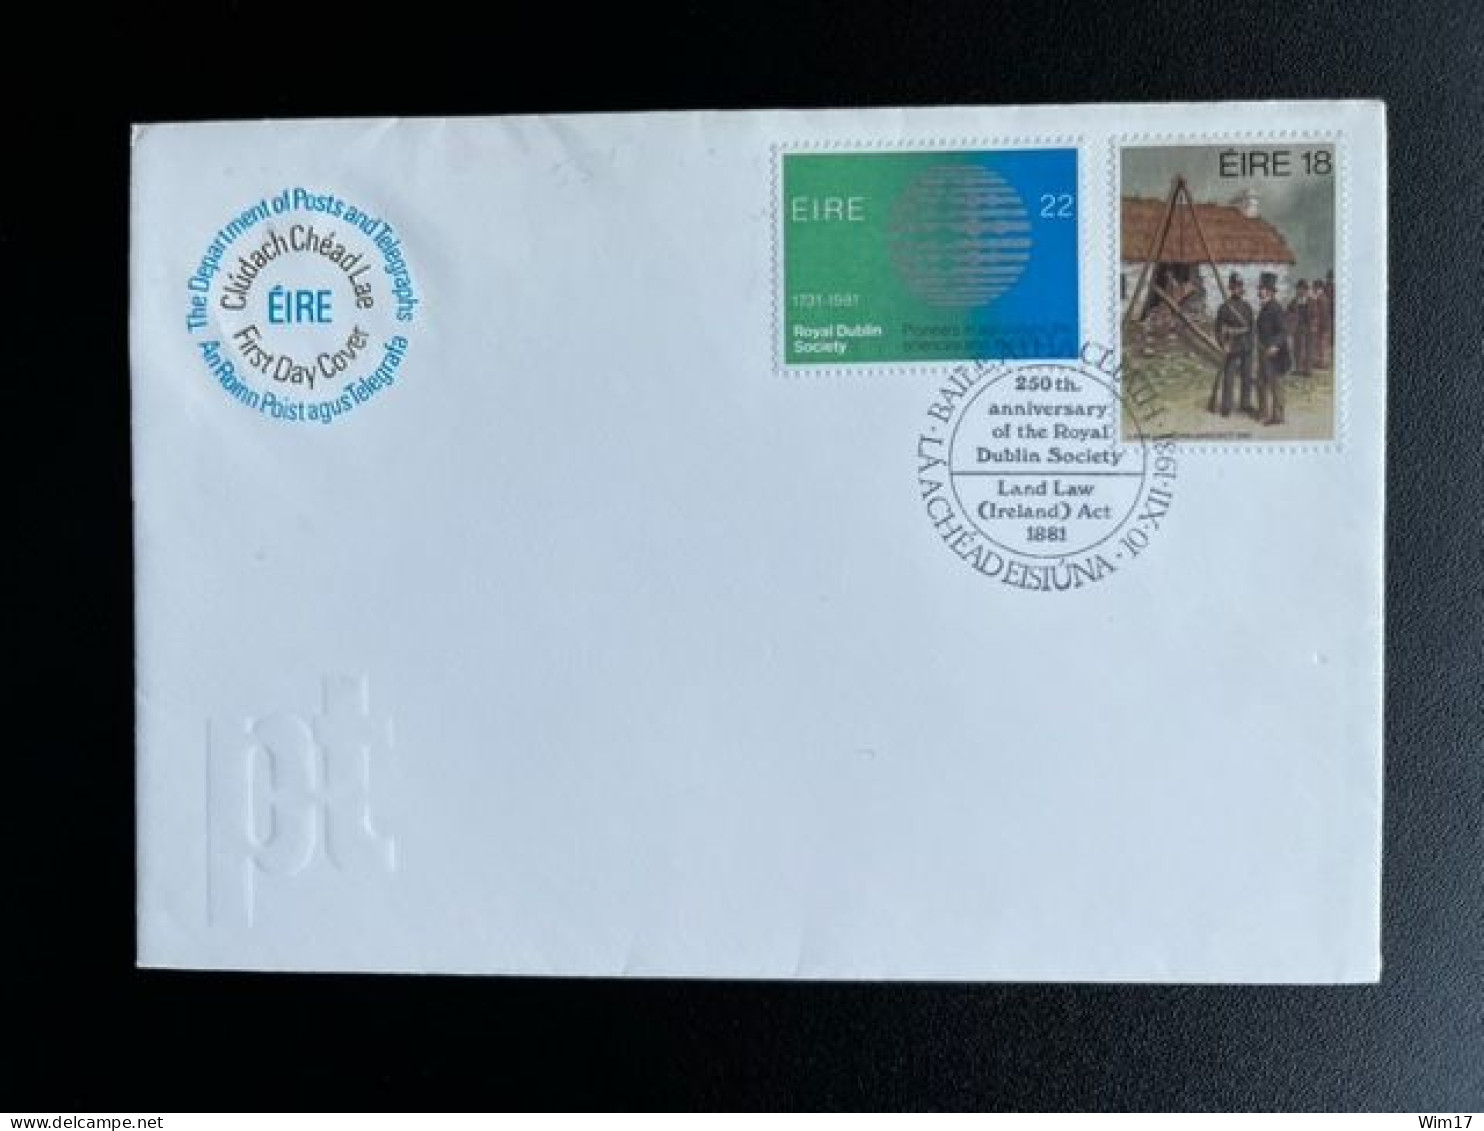 IRELAND 1981 FDC LAND LAW ACT & ROYAL DUBLIN SOCIETY WITH LEAFLET IERLAND EIRE - FDC